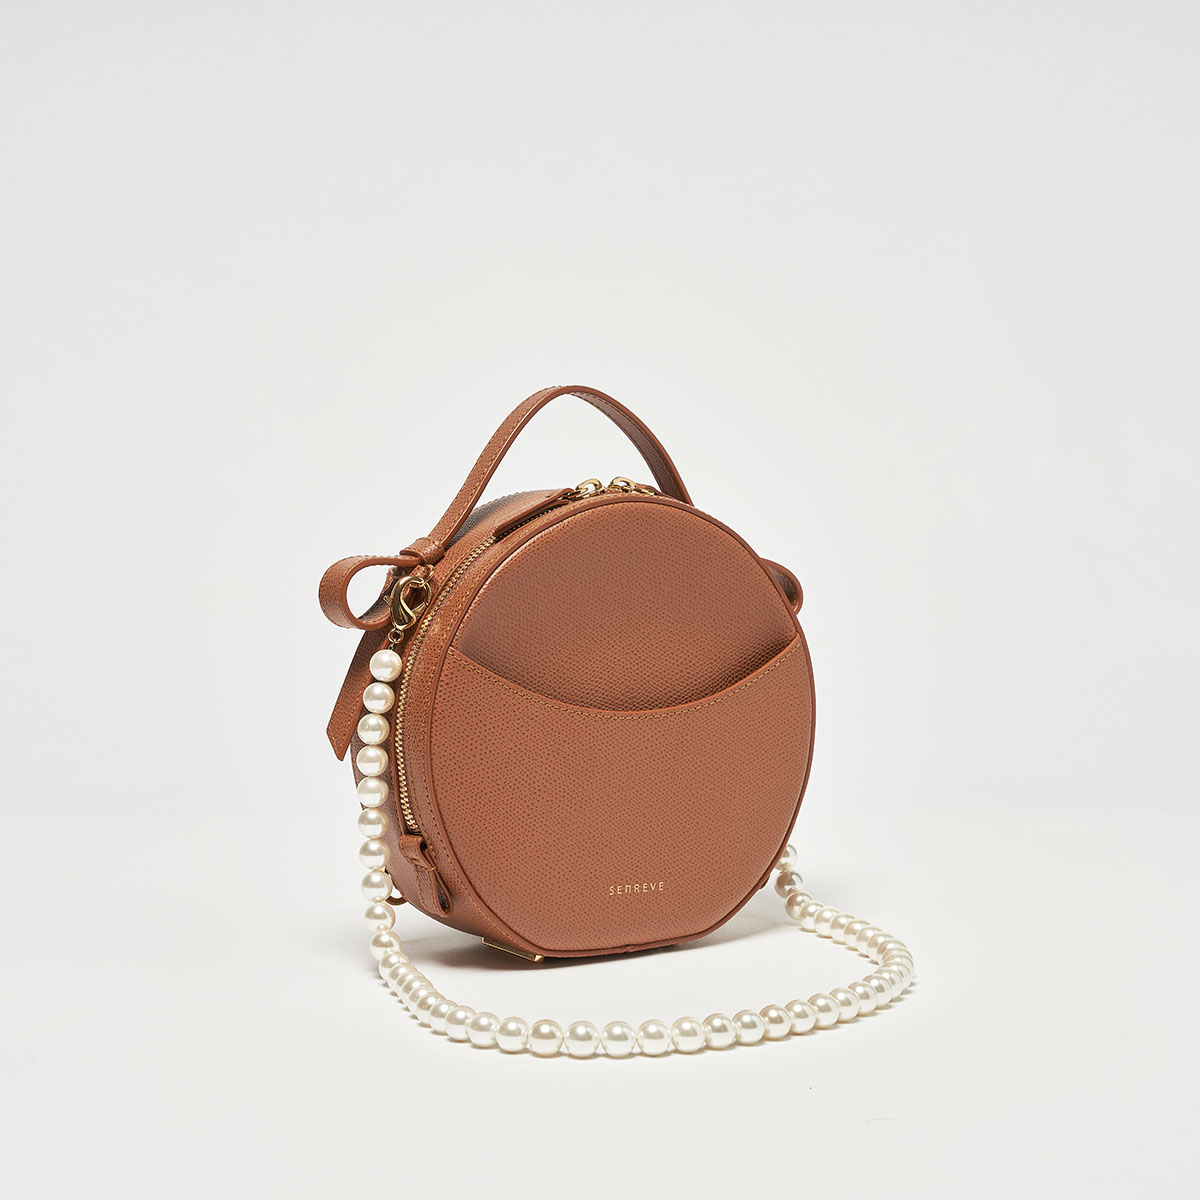 Circa Bag Pebbled Chestnut with Gold Hardware and Pearl Shoulder Chain Attached